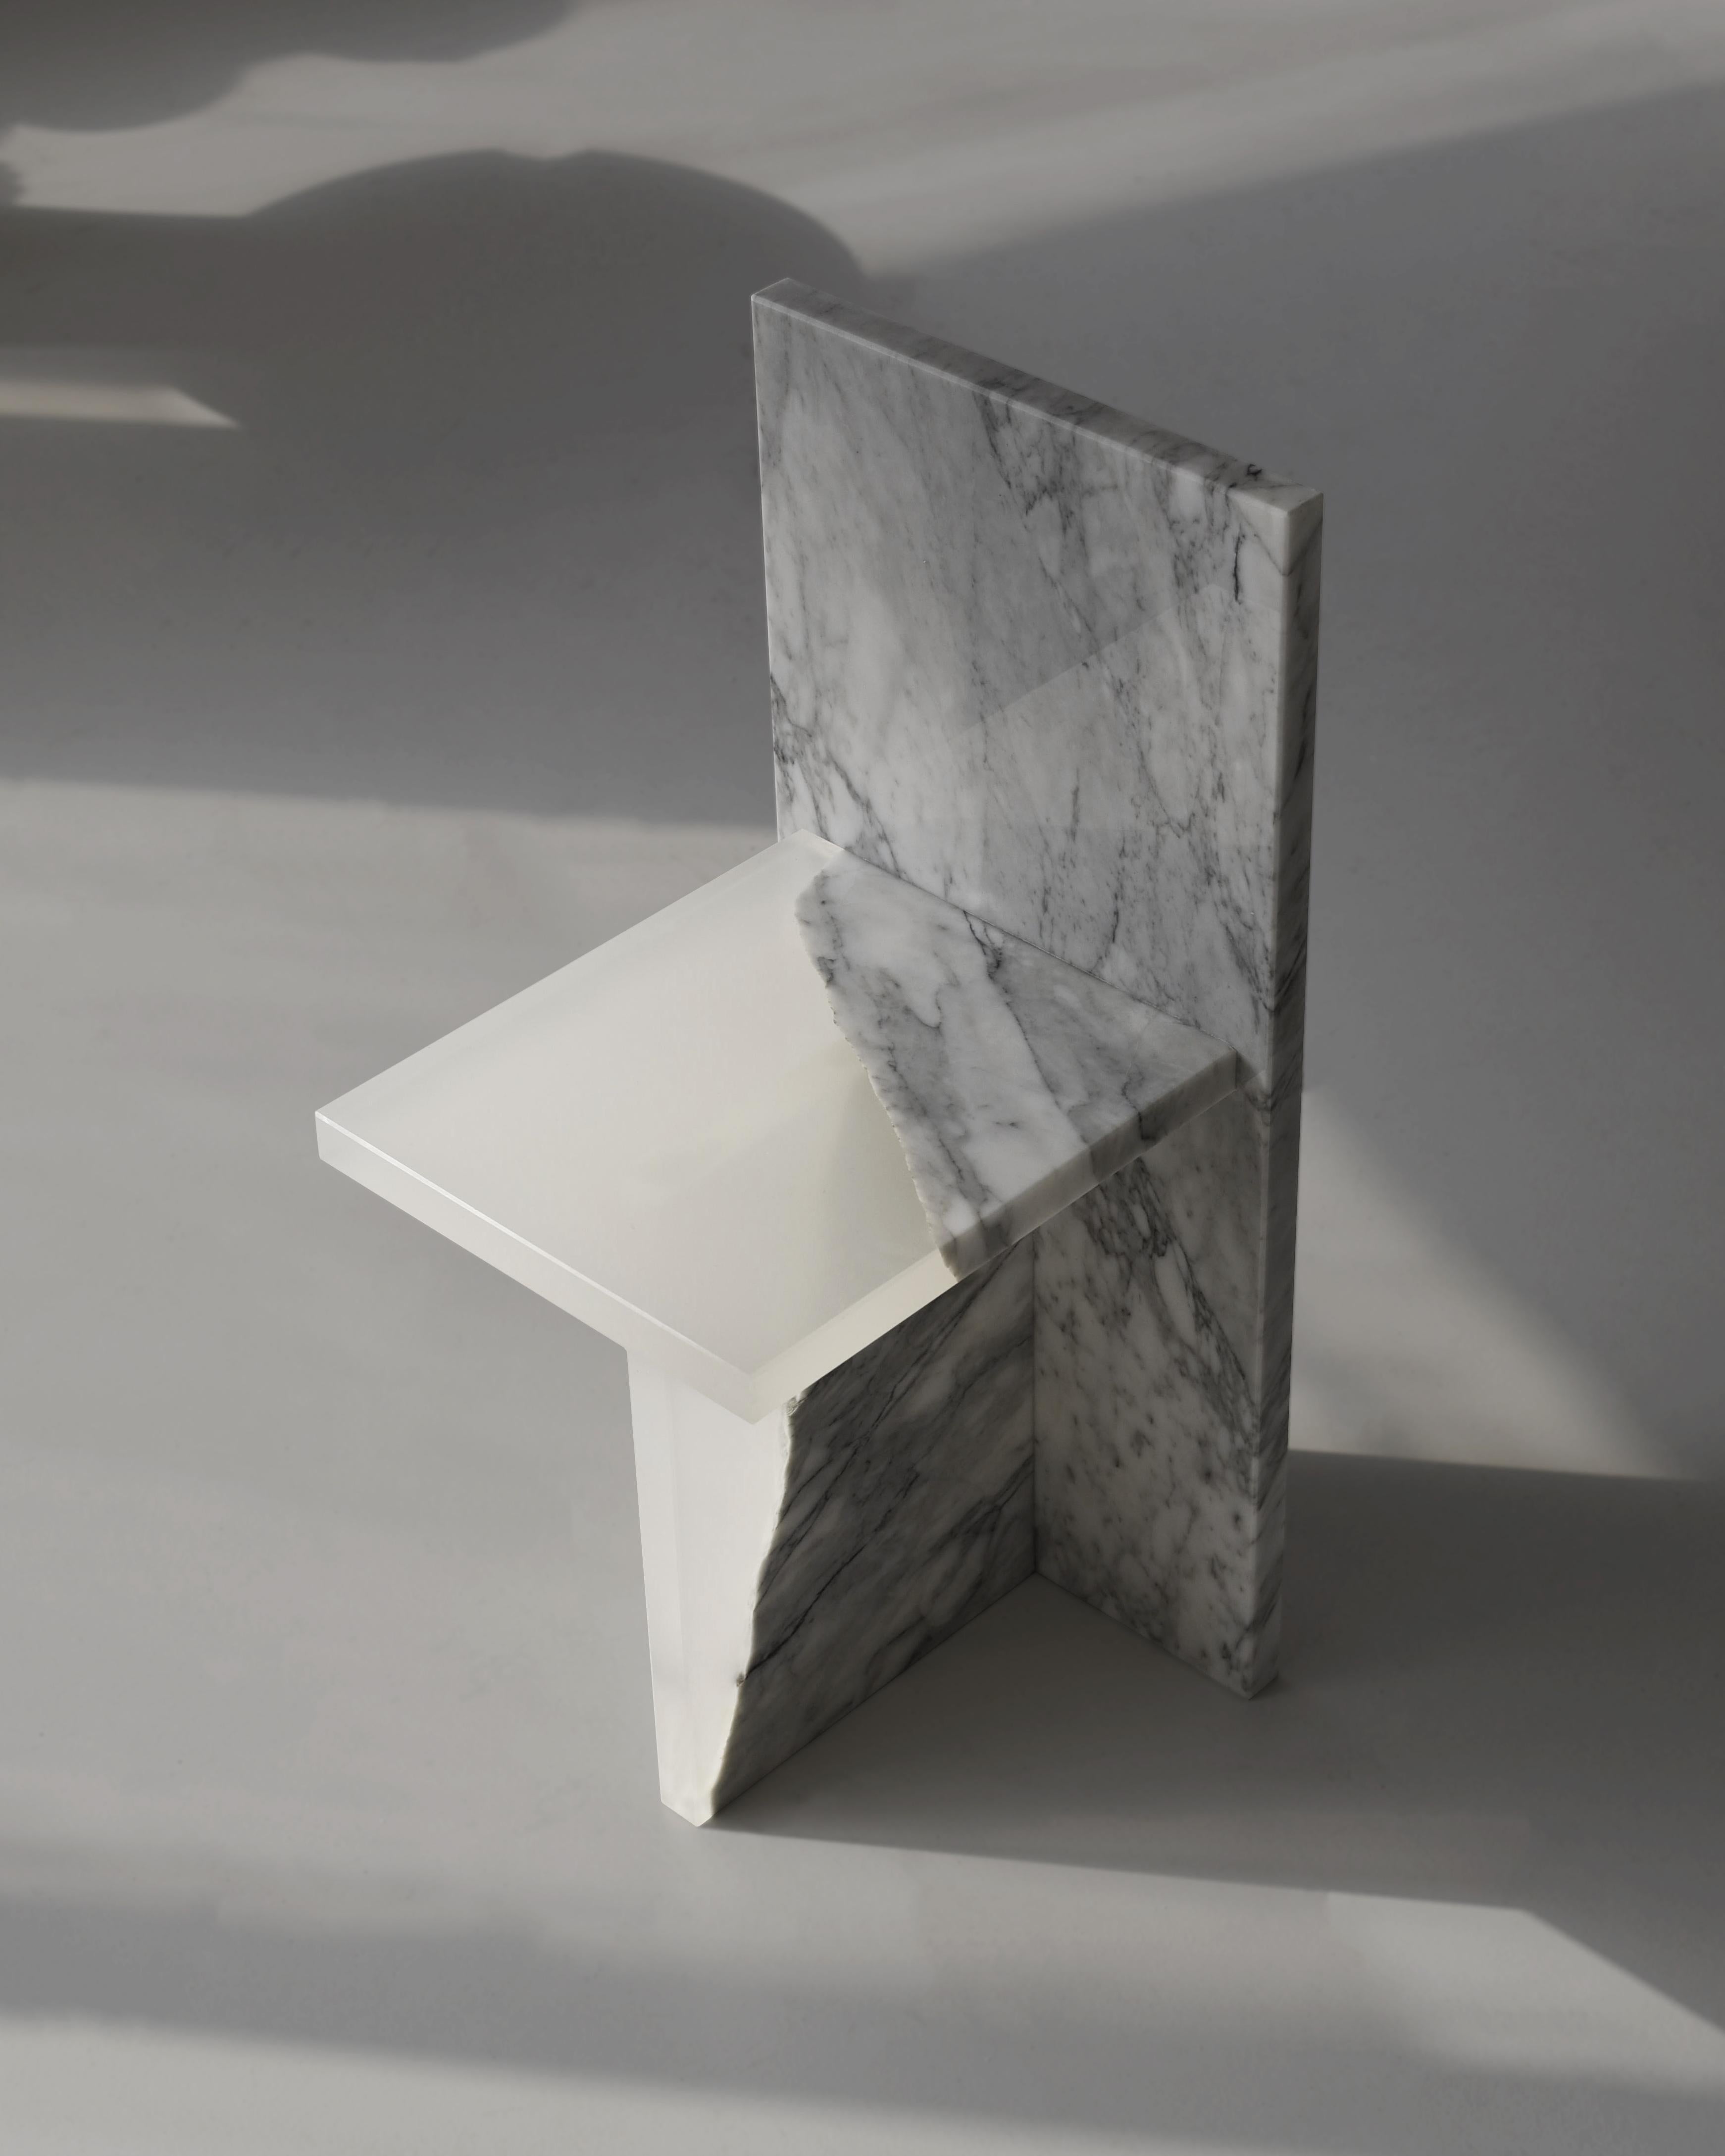 White marble fragment chair by Jang Hea Kyoung
Artist: Jang Hea Kyoung
Materials: Crystal resin and marble
Dimensions: 33 x 34 x 74 cm

Jang Hea Kyoung is based in Seoul, Republic of Korea. She searches for craft elements and makes modern